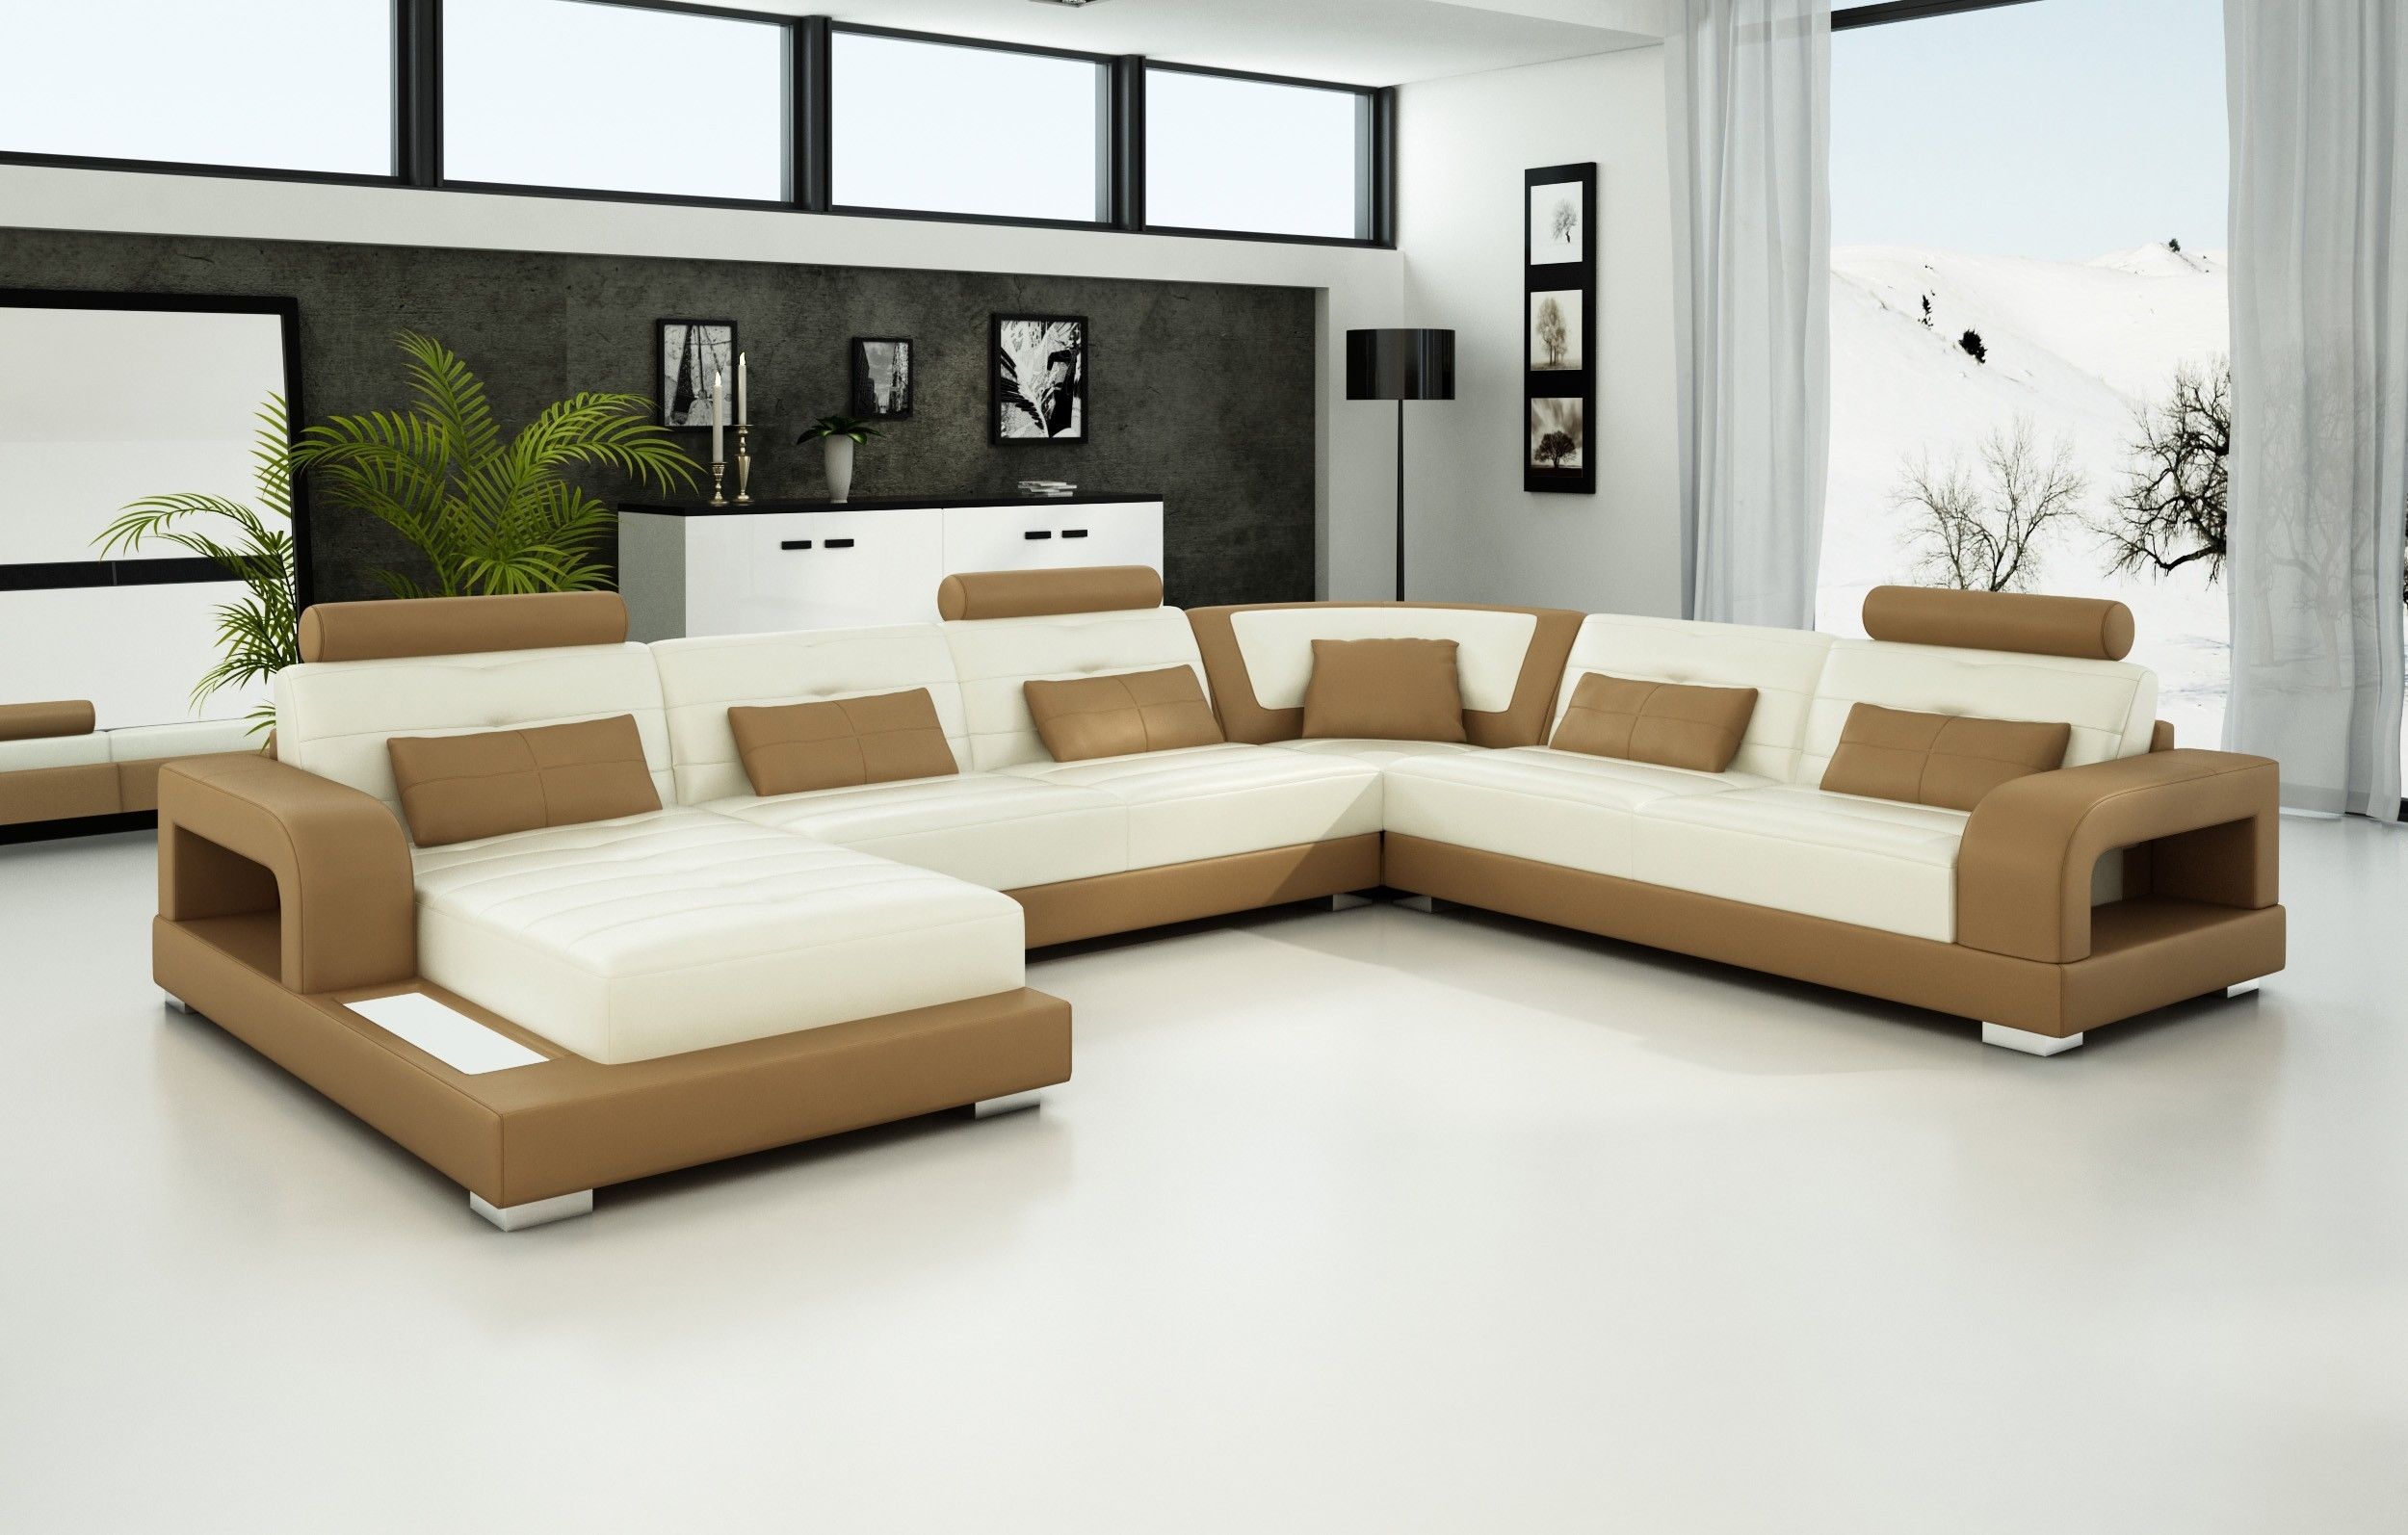 Olympian Sofas Pesaro Light Brown Leather Sofa – Sectional Sofas In Trinidad And Tobago Sectional Sofas (View 9 of 10)